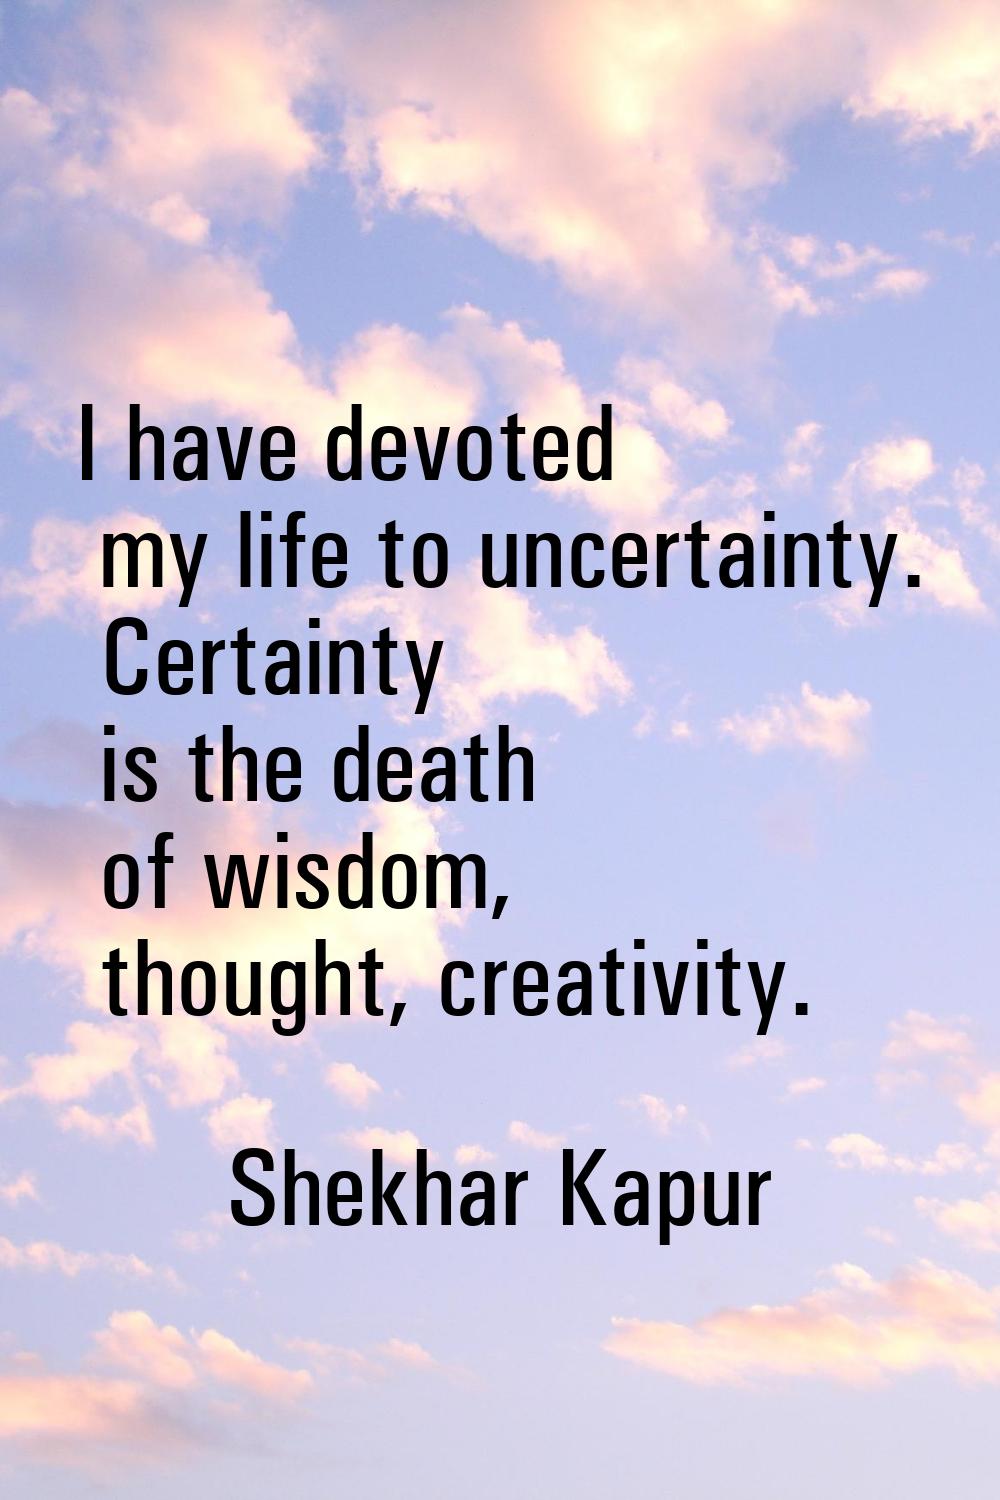 I have devoted my life to uncertainty. Certainty is the death of wisdom, thought, creativity.